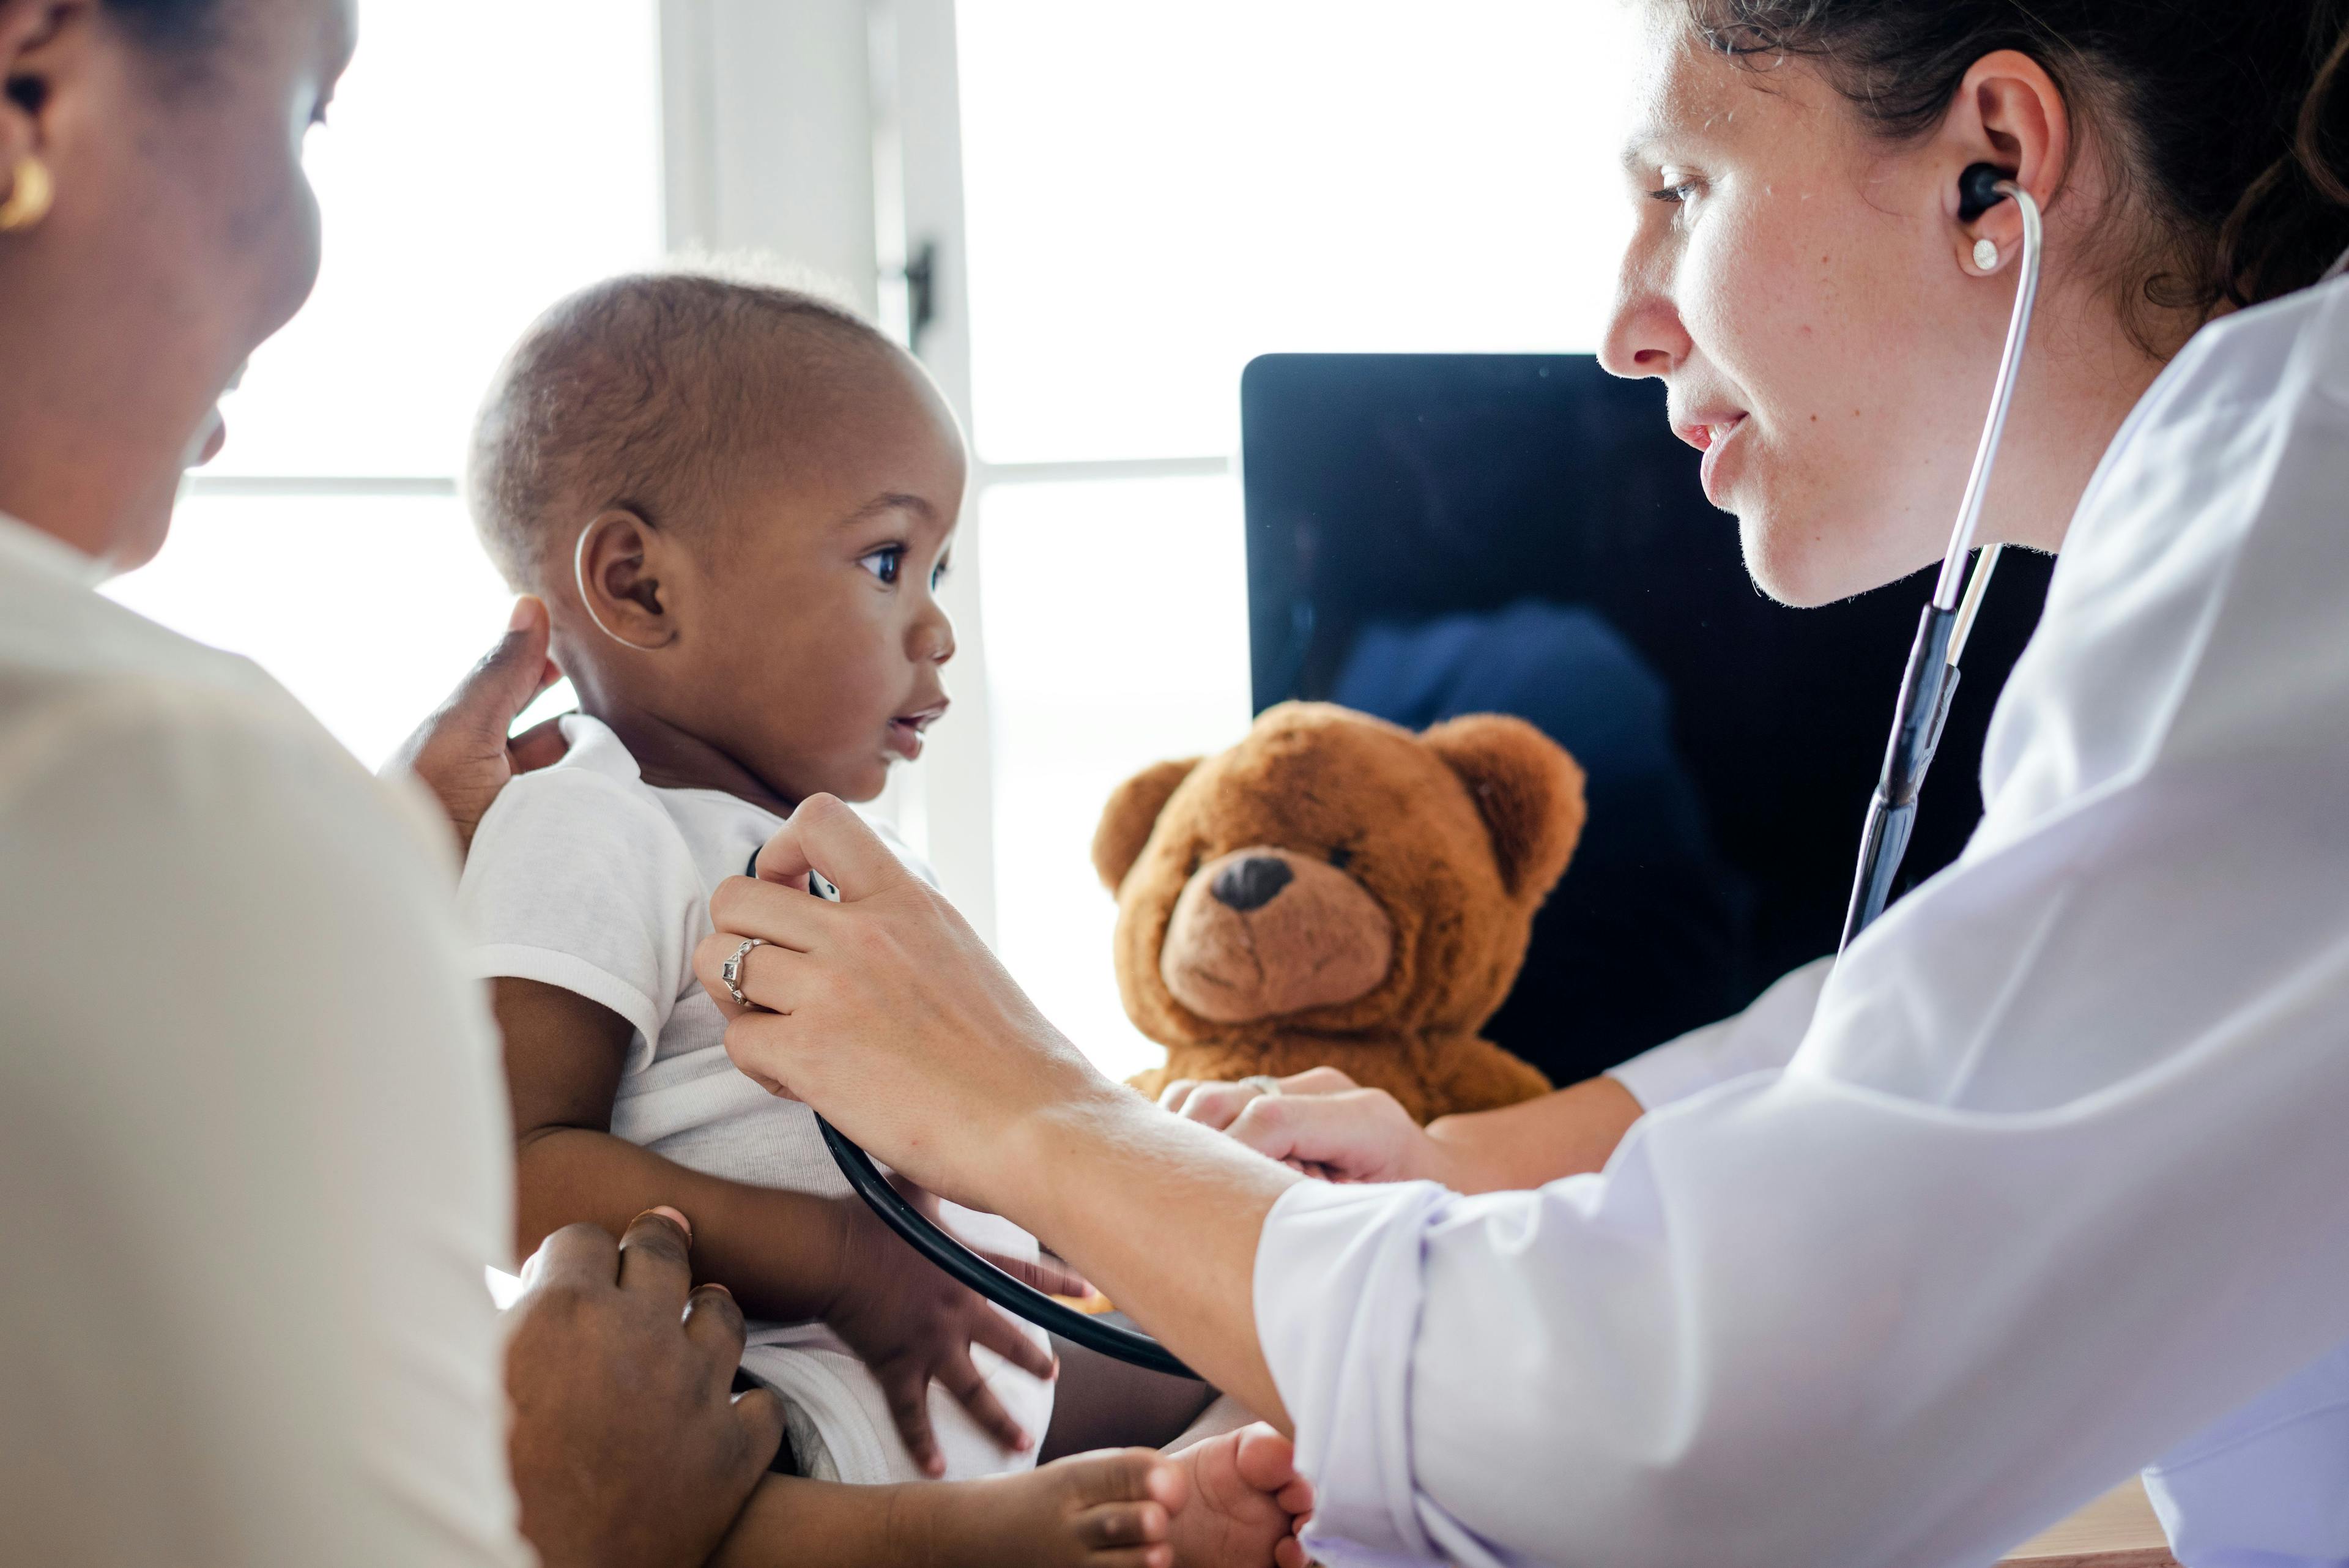 Child being examined by pediatrician  | Image Credit: © Rawpixel.com - © Rawpixel.com - stock.adobe.com.